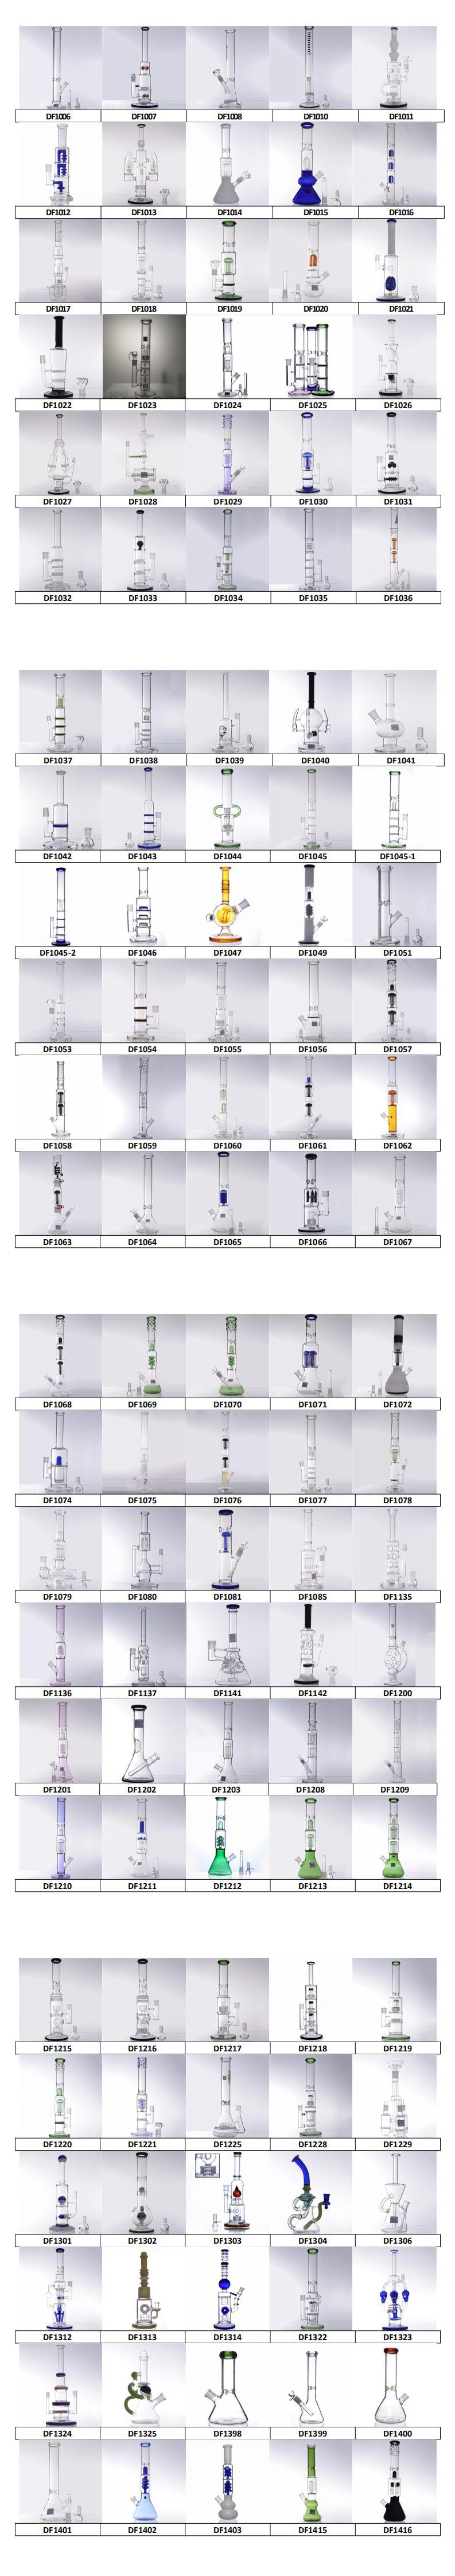 DF2102 Hot Sales Small Size Beaker Decals Glass Somking Pipes